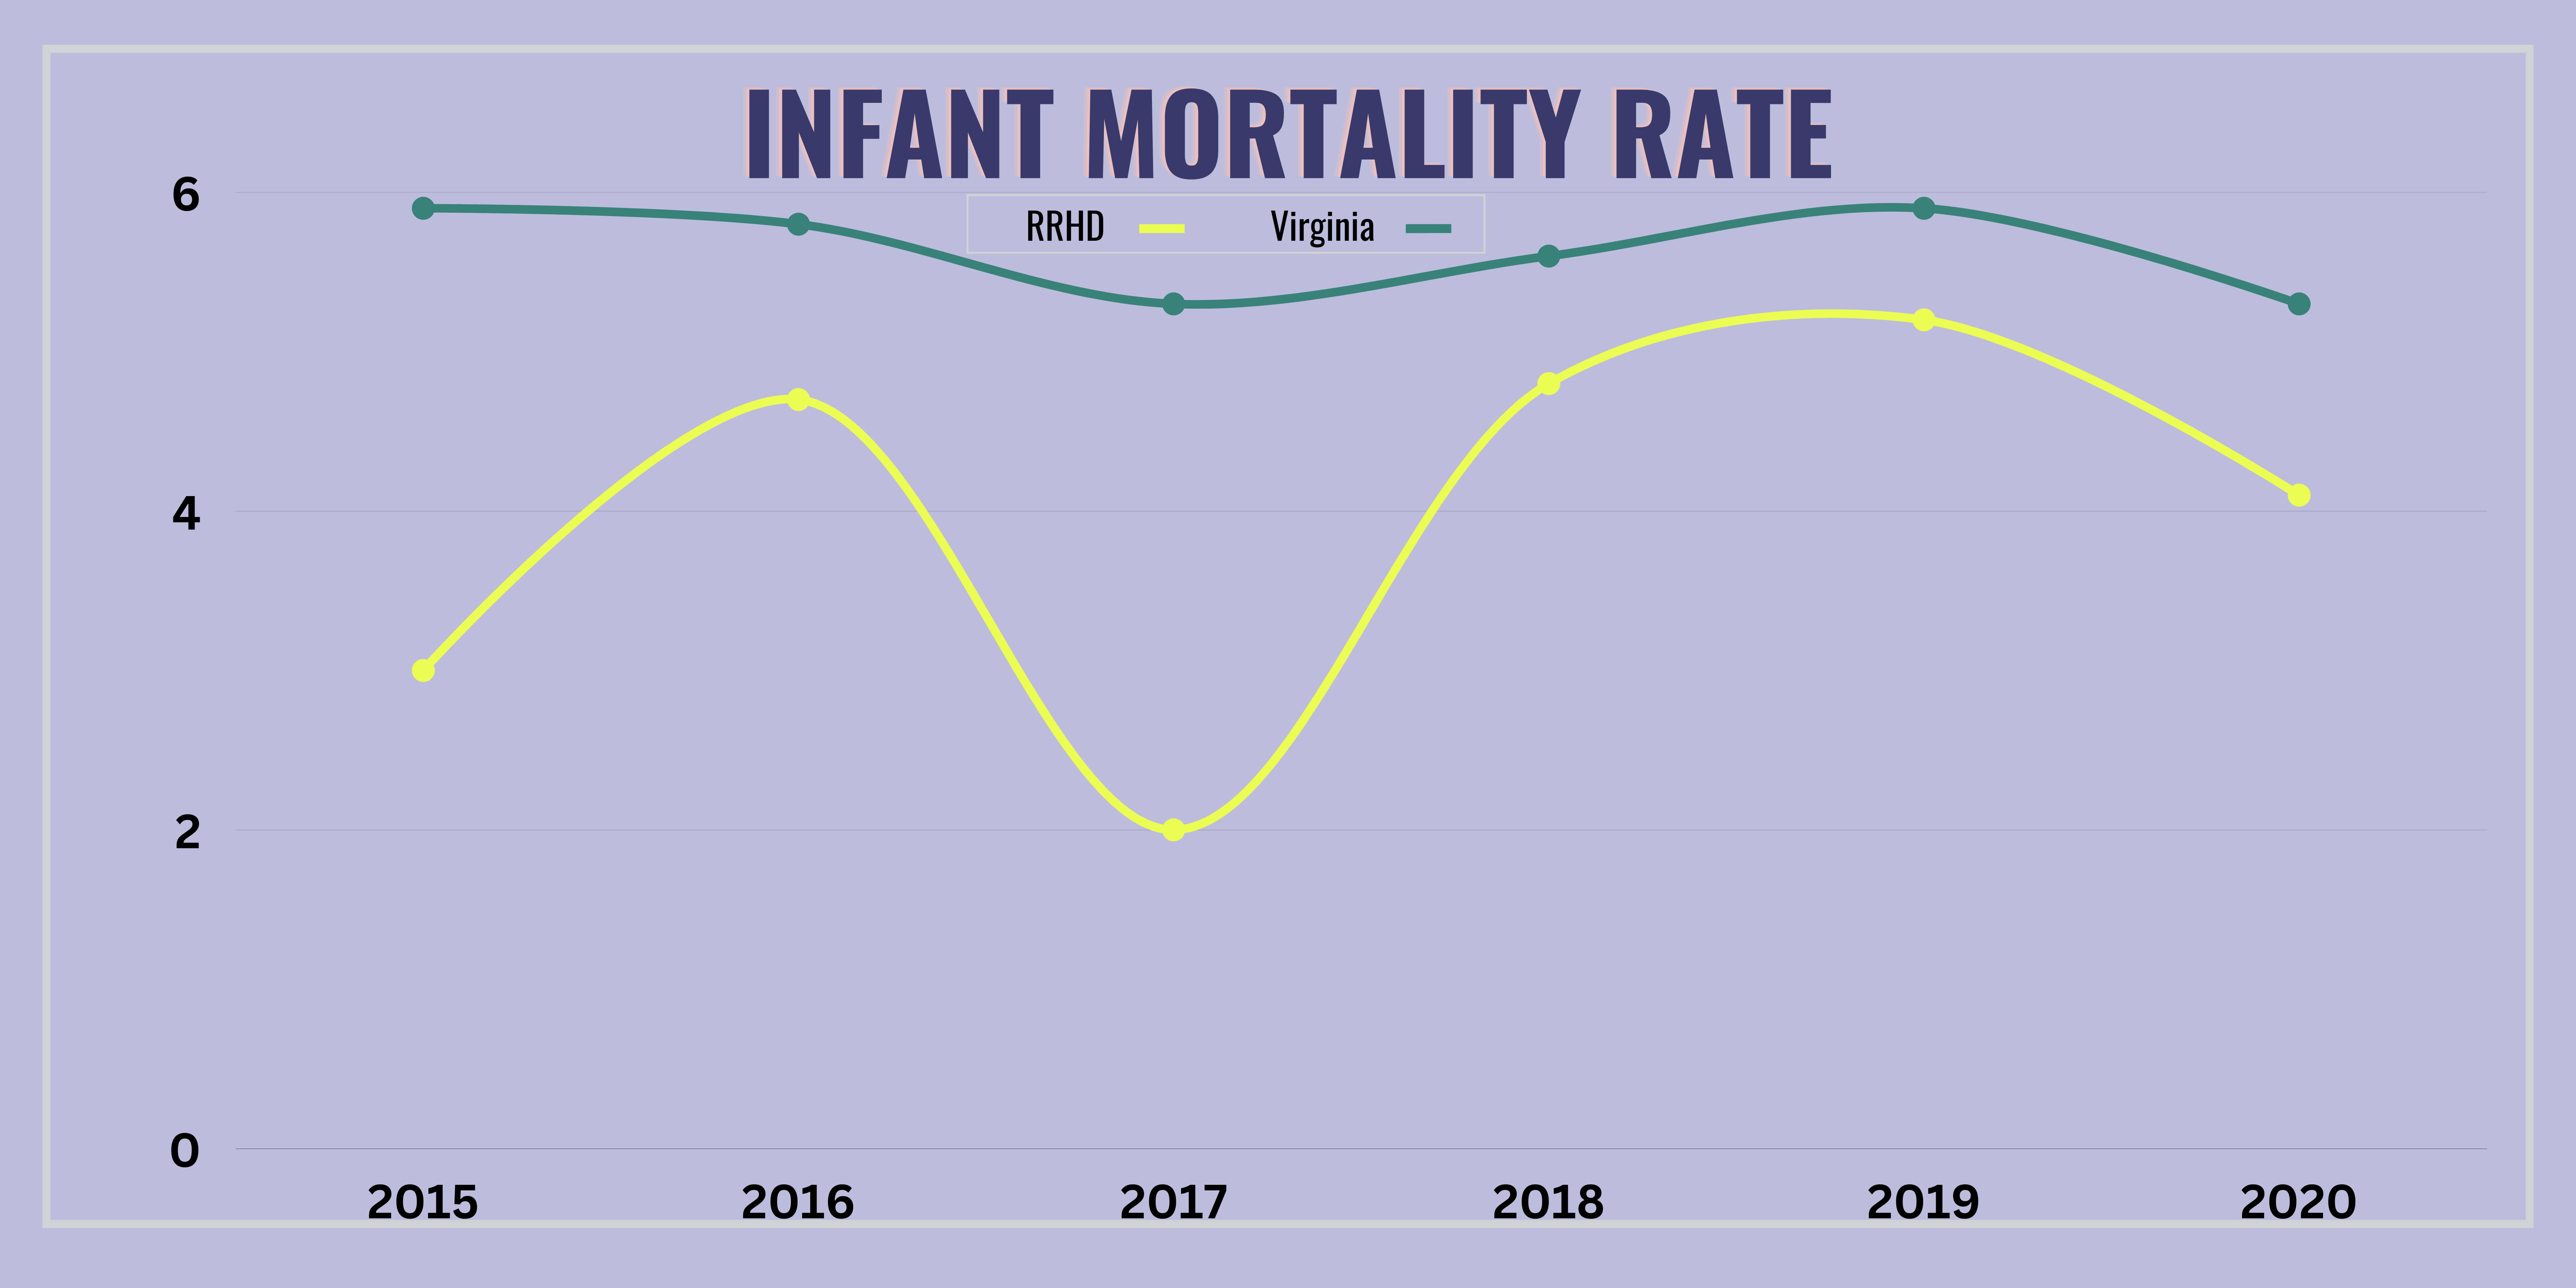 Infant Mortality Rate (per 1000 live births) from 2015-2020 Graph
Virginia's infant mortality rate is higher than the health districts. Both regions experienced in drop-in infant mortality rate in 2017 before increasing in 2018 and 2019, but now rates have again start to decline. 